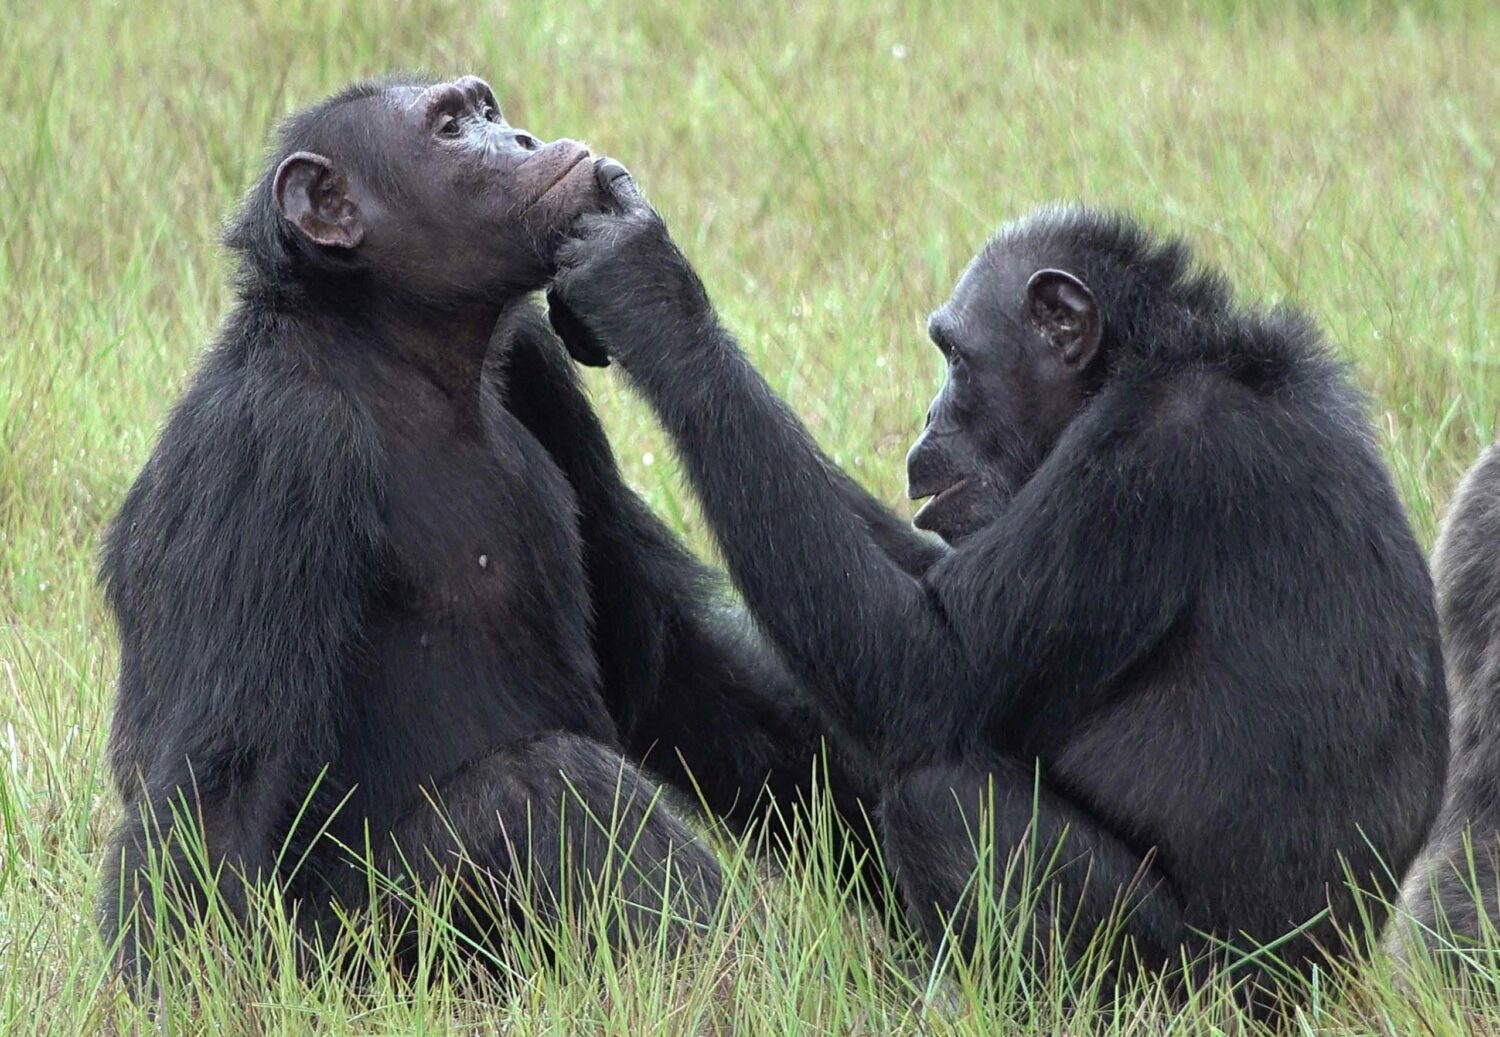 Chimpanzees Observed Applying Insects to Wounds – A Potential Case of Medication?